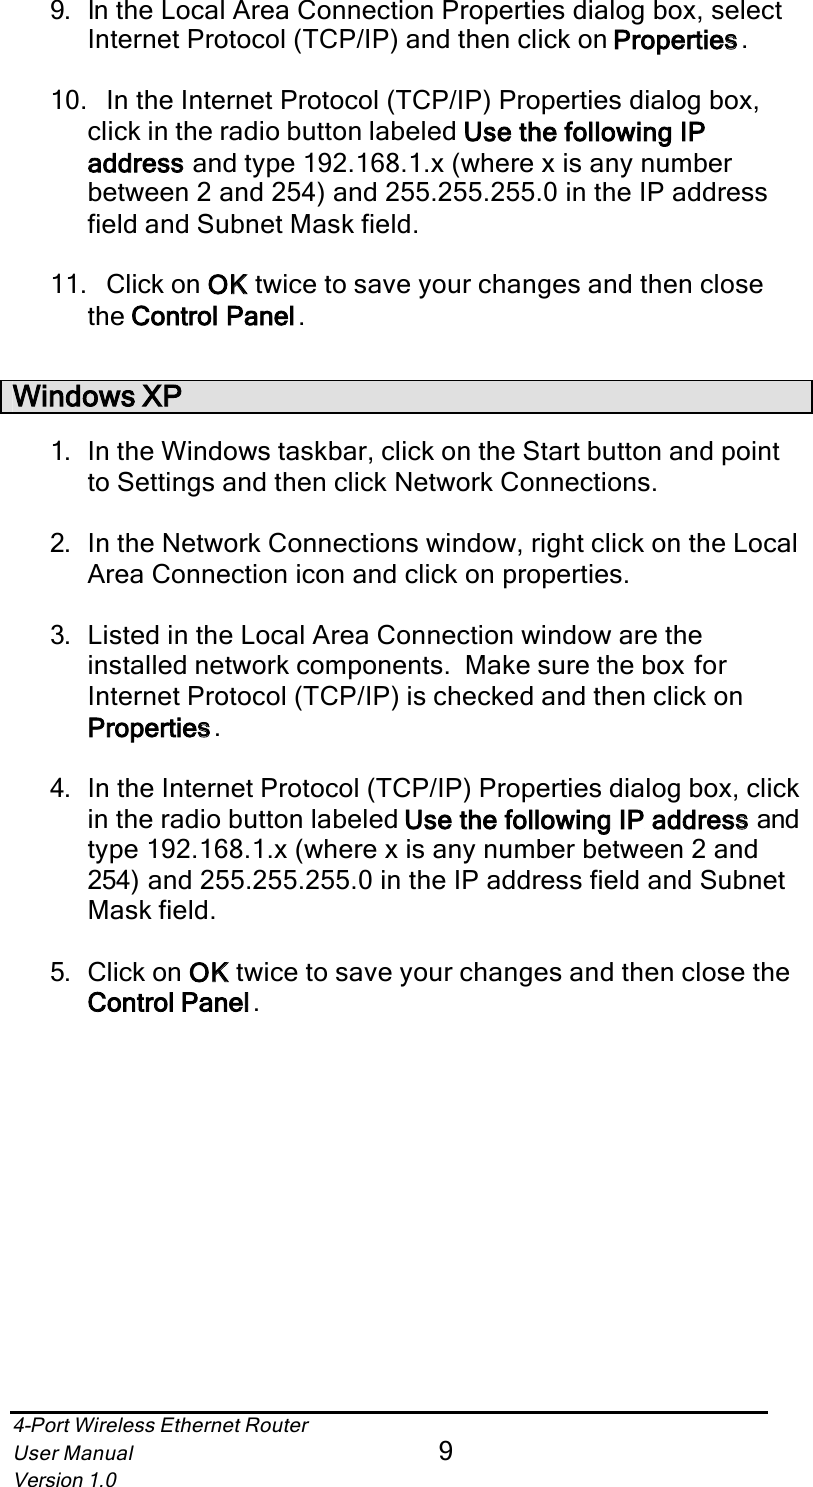 4-Port Wireless Ethernet RouterUser Manual9Version 1.09. In the Local Area Connection Properties dialog box, select Internet Protocol (TCP/IP) and then click on Propertiess.10. In the Internet Protocol (TCP/IP) Properties dialog box, click in the radio button labeled Use the following IP addresss and type 192.168.1.x (where x is any number between 2 and 254) and 255.255.255.0 in the IP address field and Subnet Mask field.11. Click on OKK twice to save your changes and then close the Control Panell.Windows XP1. In the Windows taskbar, click on the Start button and pointto Settings and then click Network Connections.2. In the Network Connections window, right click on the Local Area Connection icon and click on properties.3. Listed in the Local Area Connection window are the installed network components.  Make sure the box for Internet Protocol (TCP/IP) is checked and then click on Propertiess.4. In the Internet Protocol (TCP/IP) Properties dialog box, click in the radio button labeled Use the following IP addresss and type 192.168.1.x (where x is any number between 2 and 254) and 255.255.255.0 in the IP address field and Subnet Mask field.5. Click on OKK twice to save your changes and then close the Control Panell.